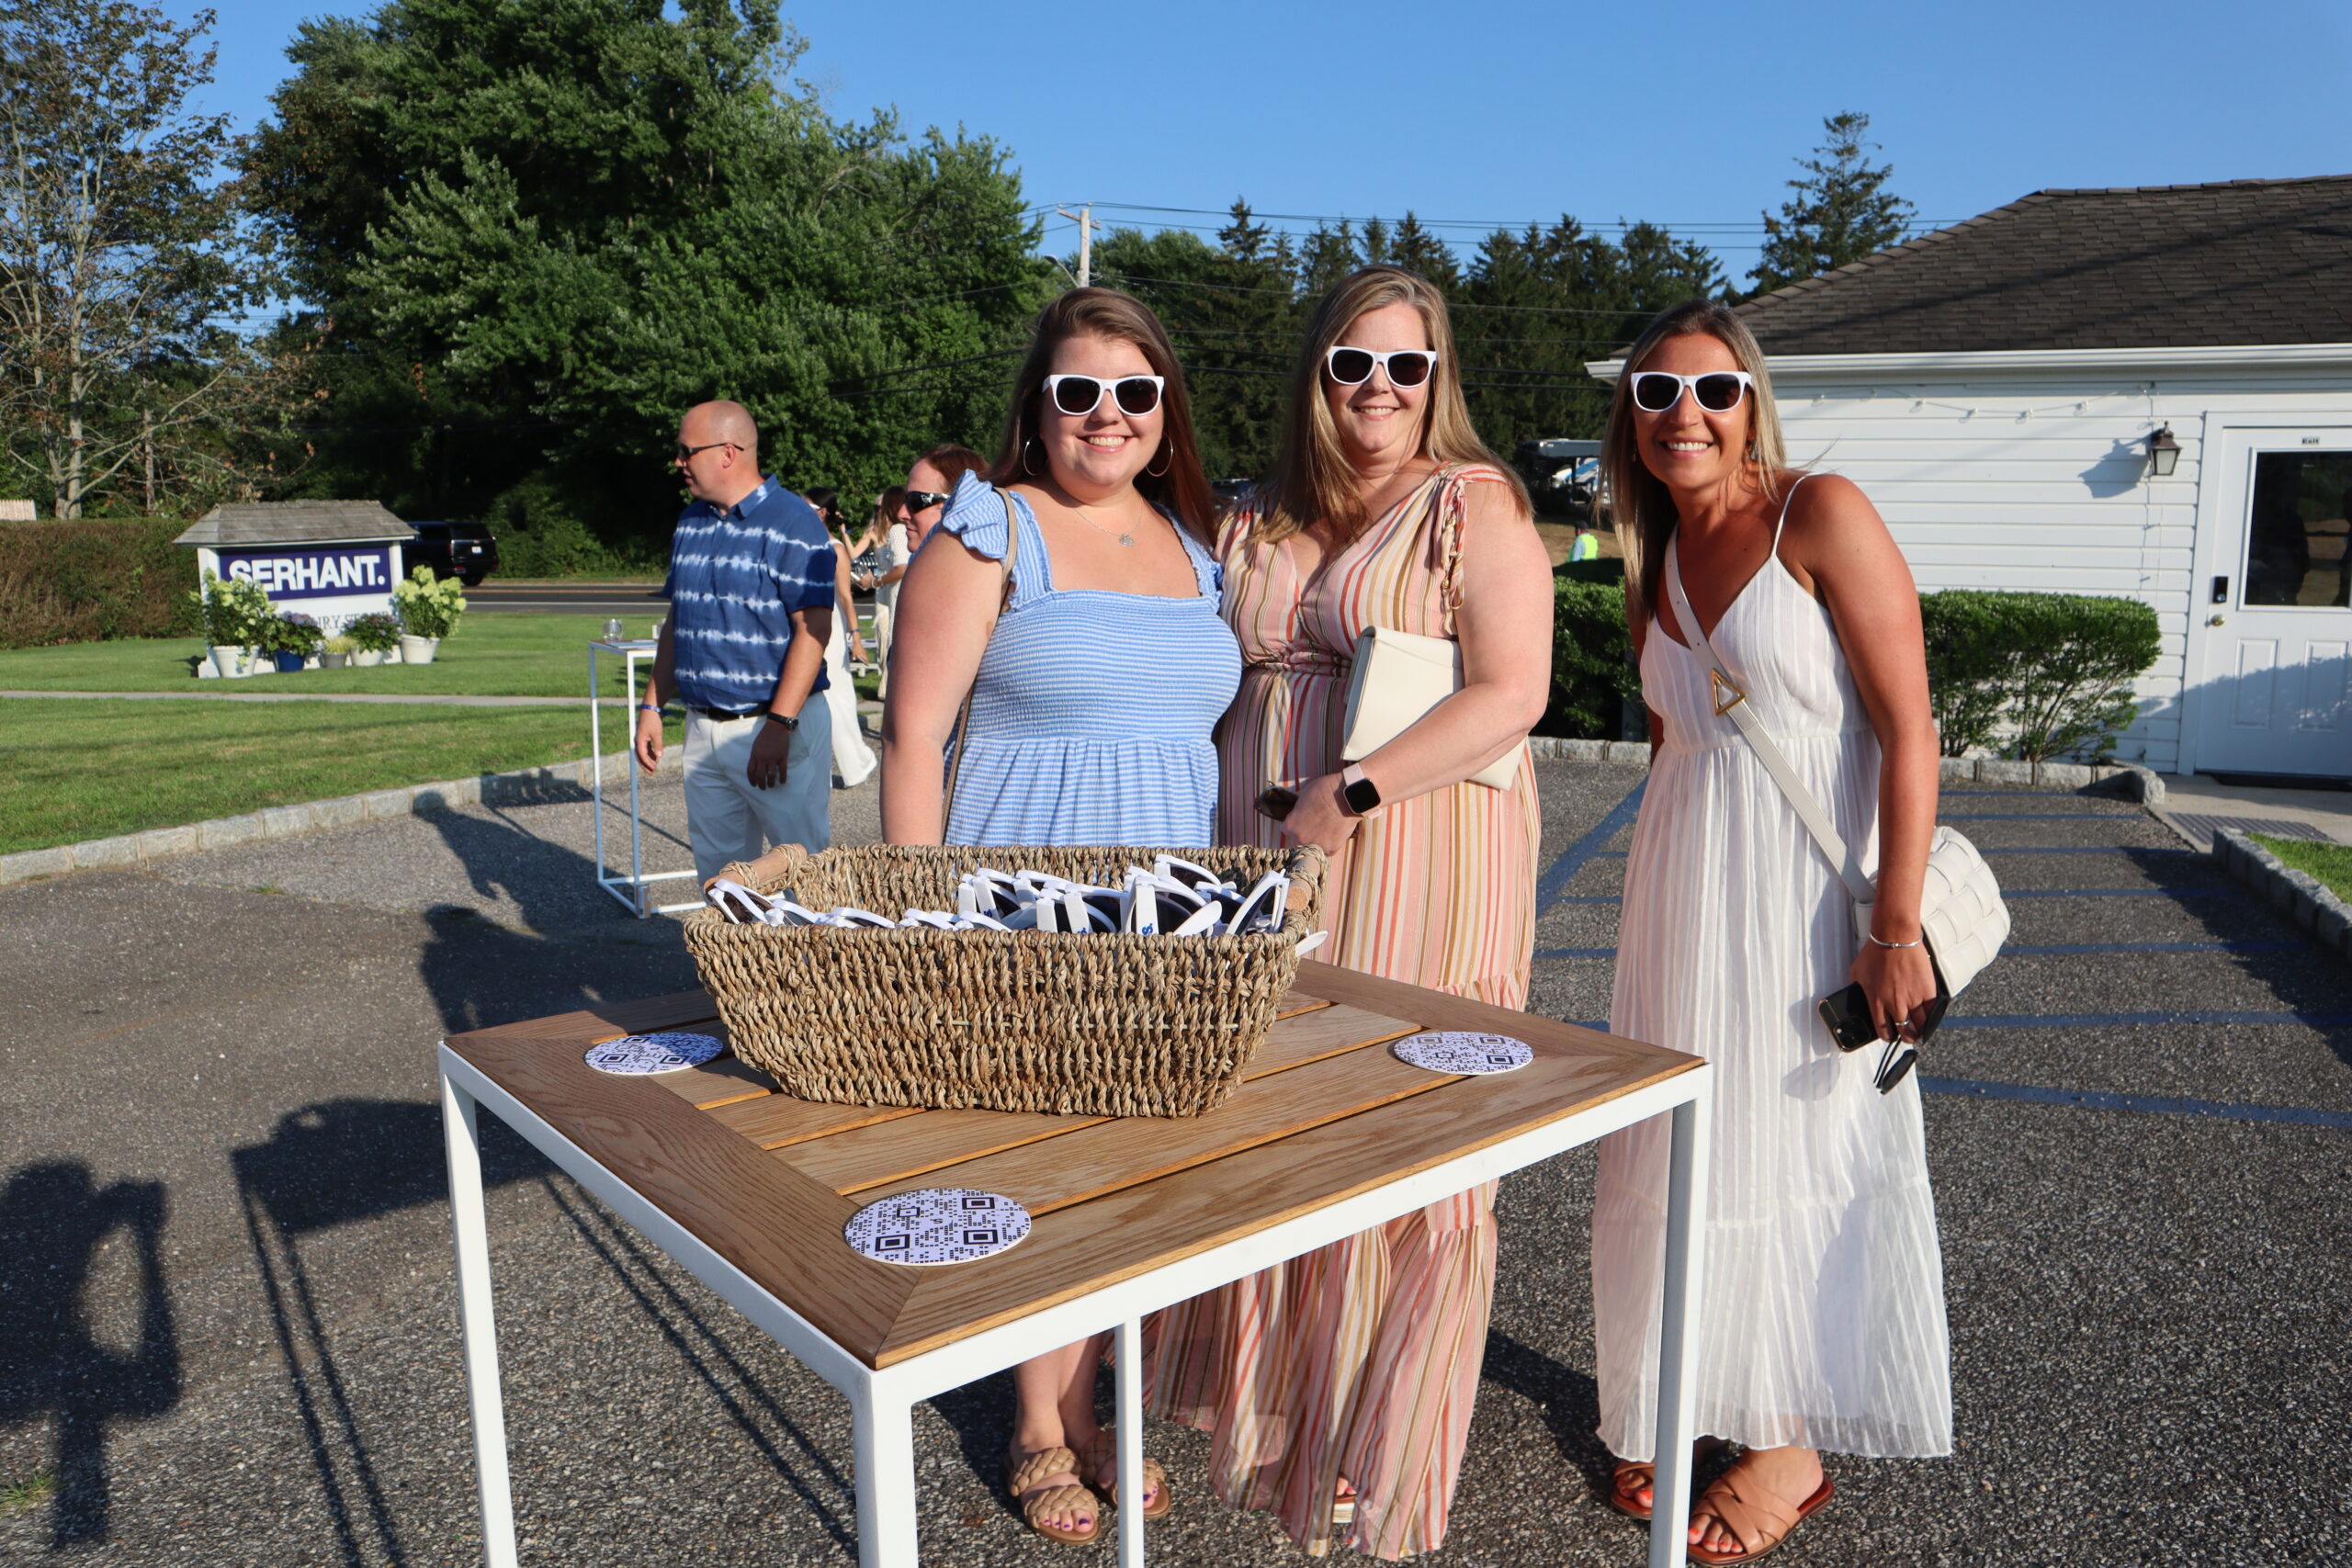 Kristina Paces, a broker at Serhant, right, Donna Downs, Paces’ aunt, center, and Lauren Downs, Paces’s cousin, left, try on the Serhant sunglasses given out at the party.  MEGAN NAFTALI